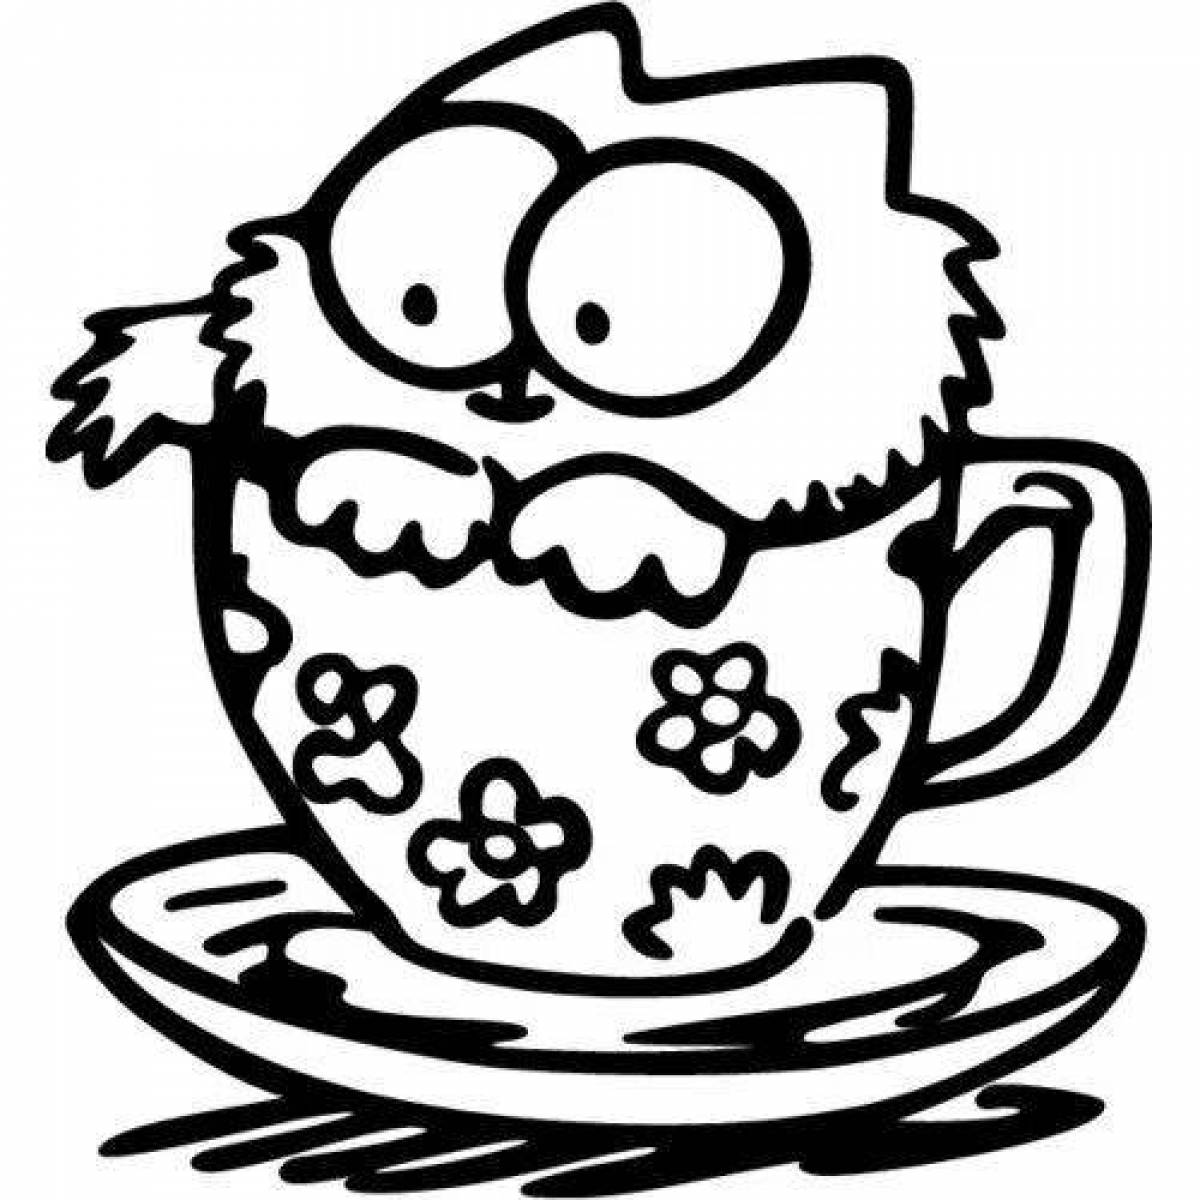 Coloring page funny cat in a mug